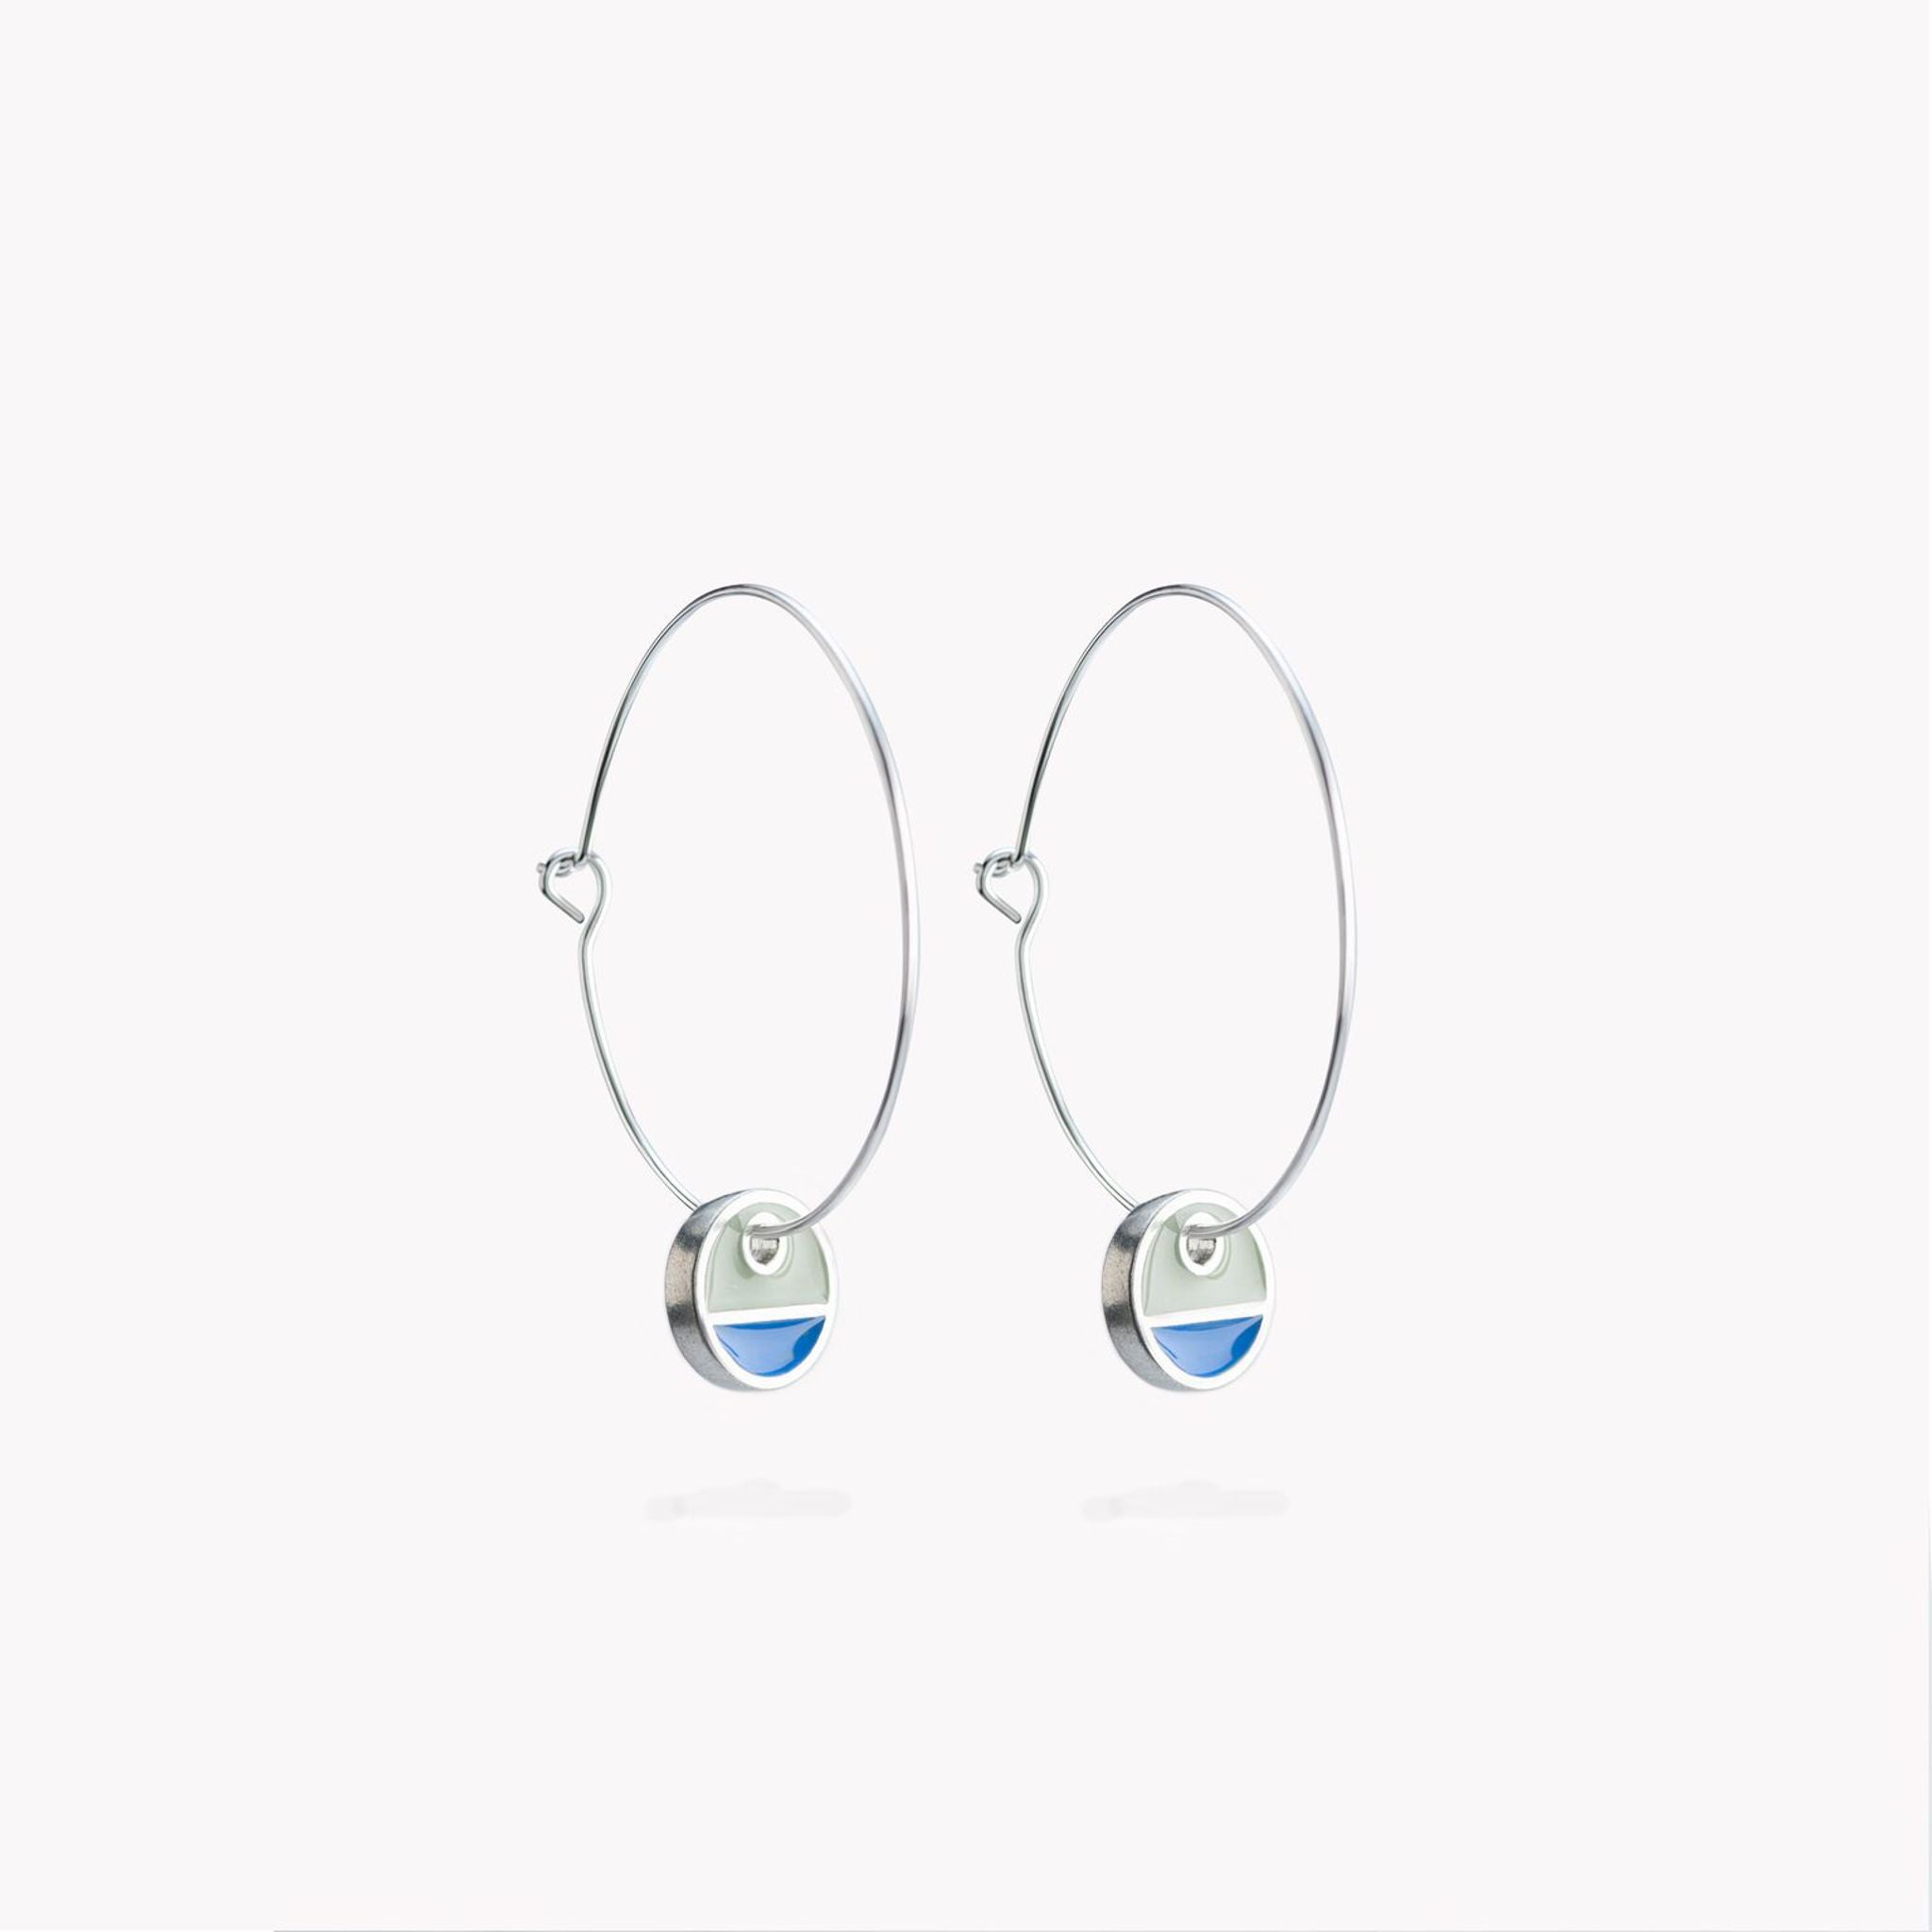 A simple pair of hoop earrings with blue and grey circular hanging discs.